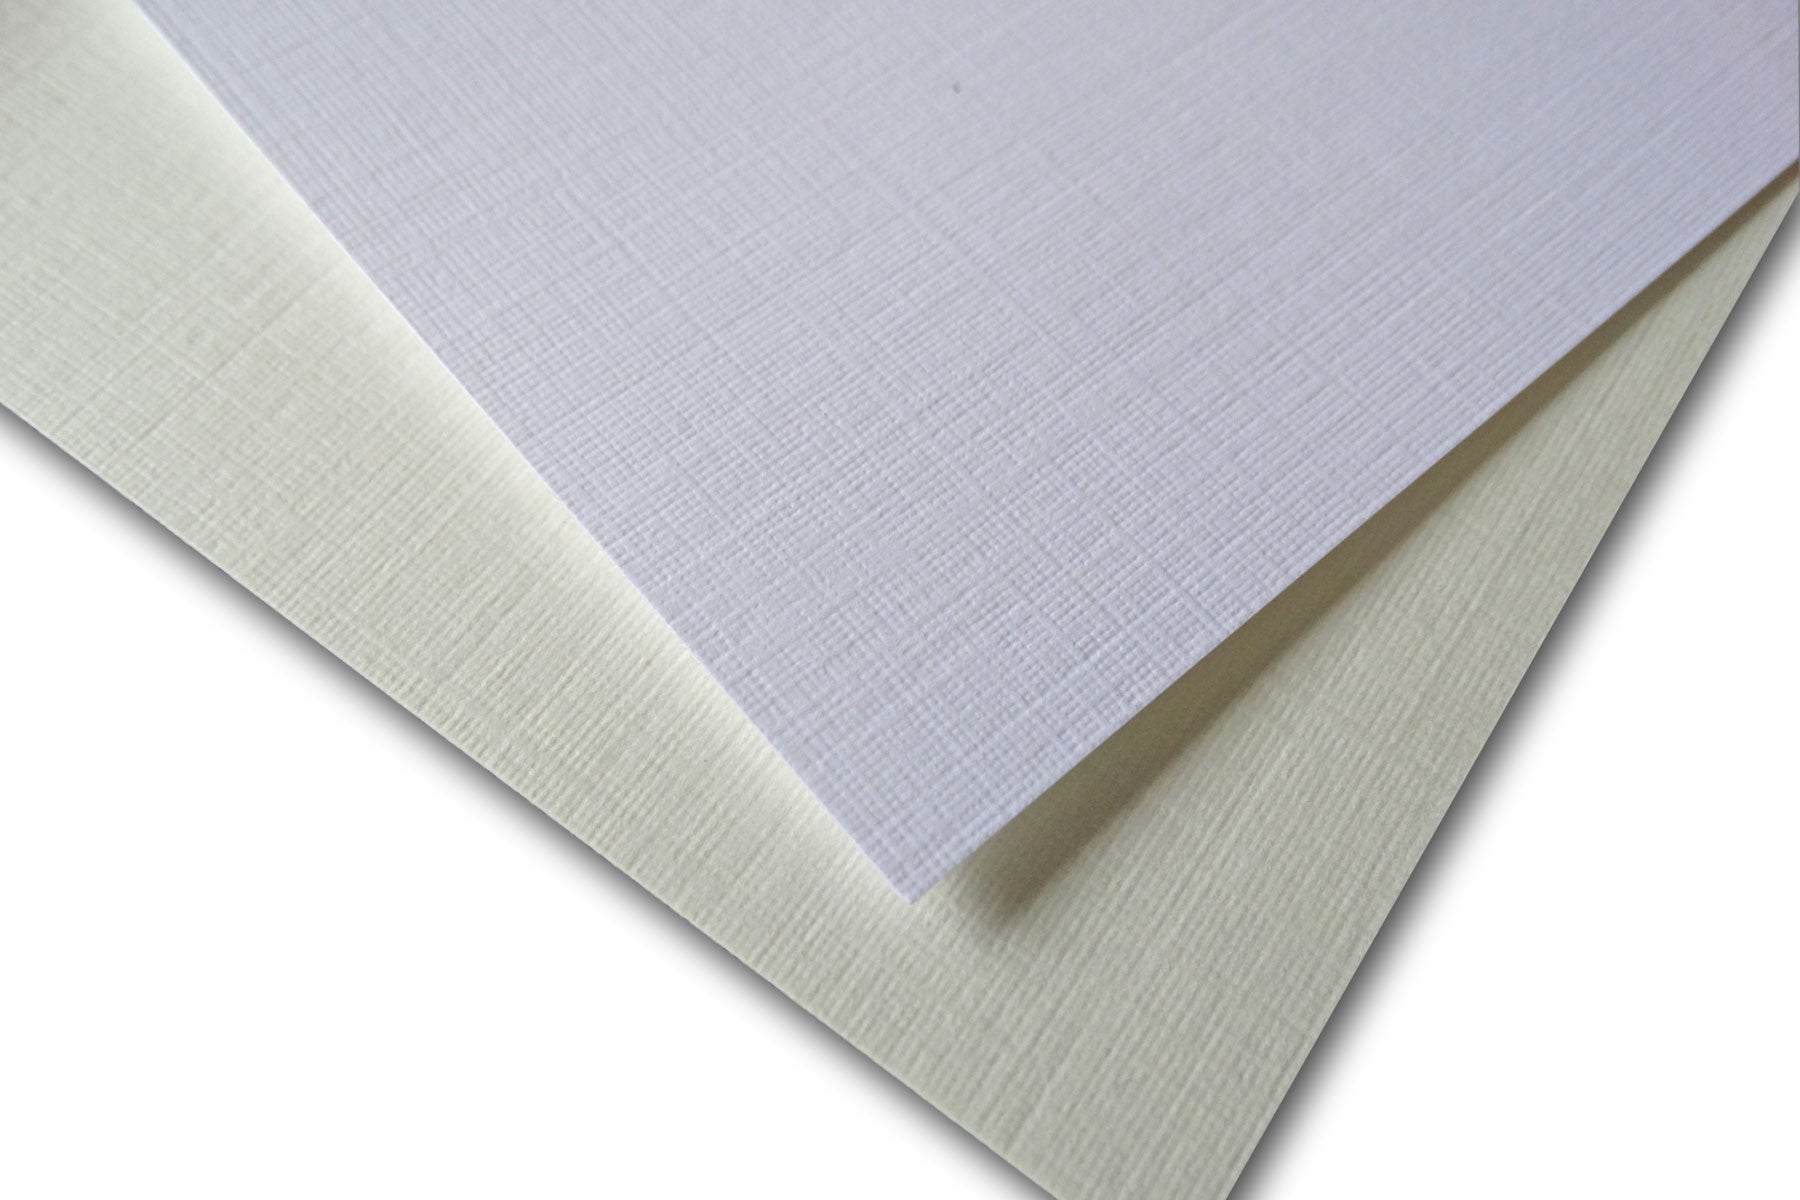 White Card Stock - 8 1/2 x 11 in 80 lb Cover Textured